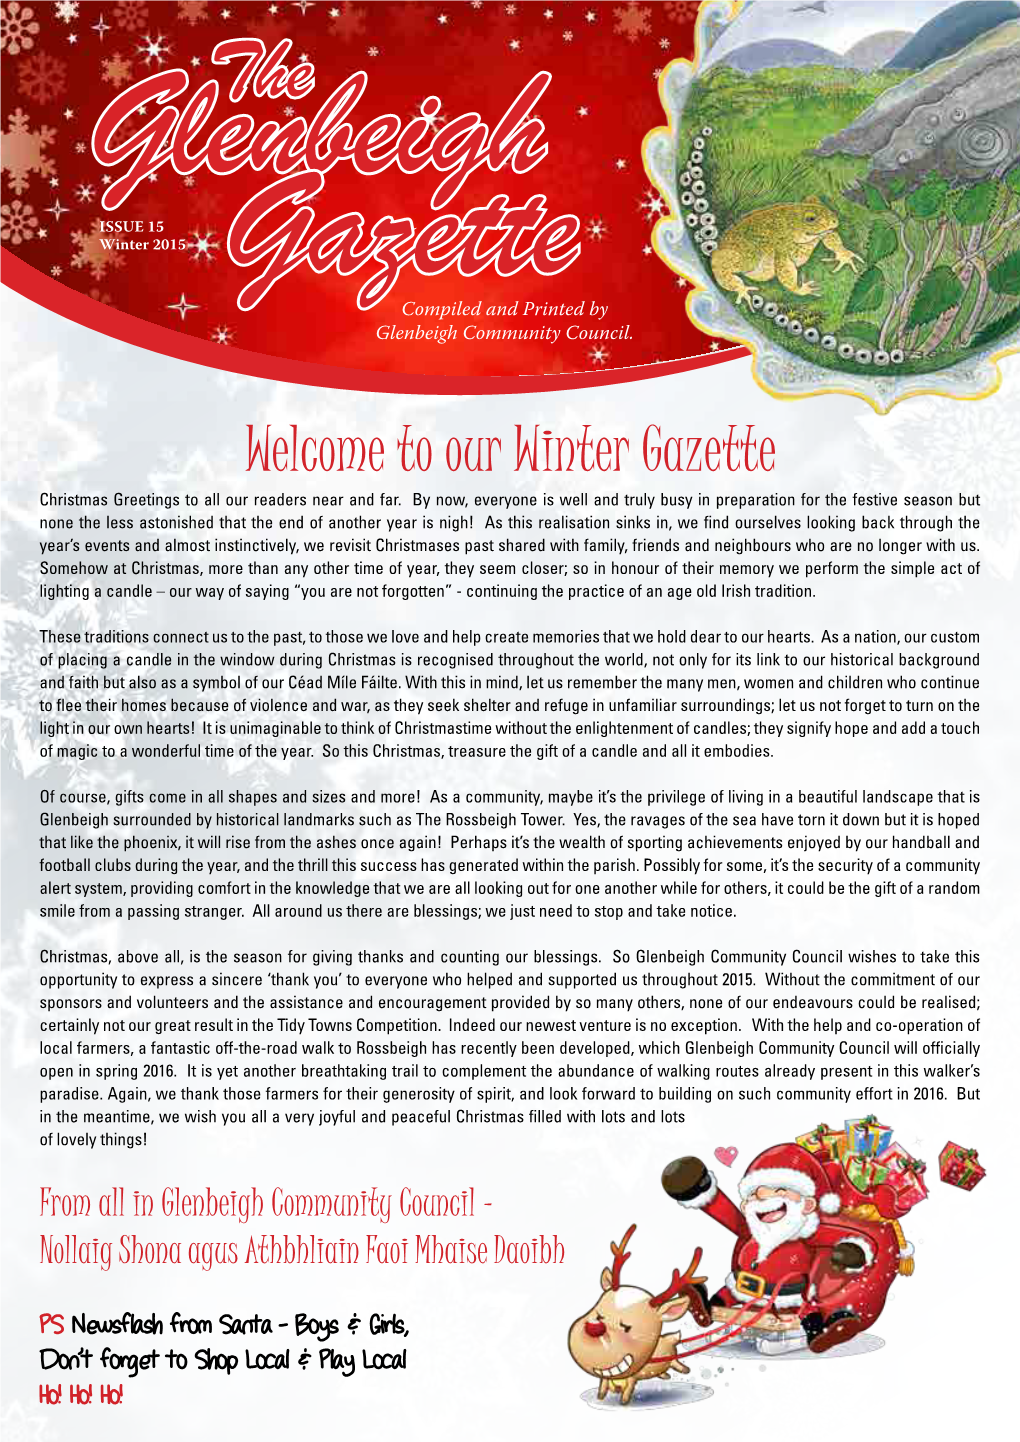 Our Winter Gazette Christmas Greetings to All Our Readers Near and Far